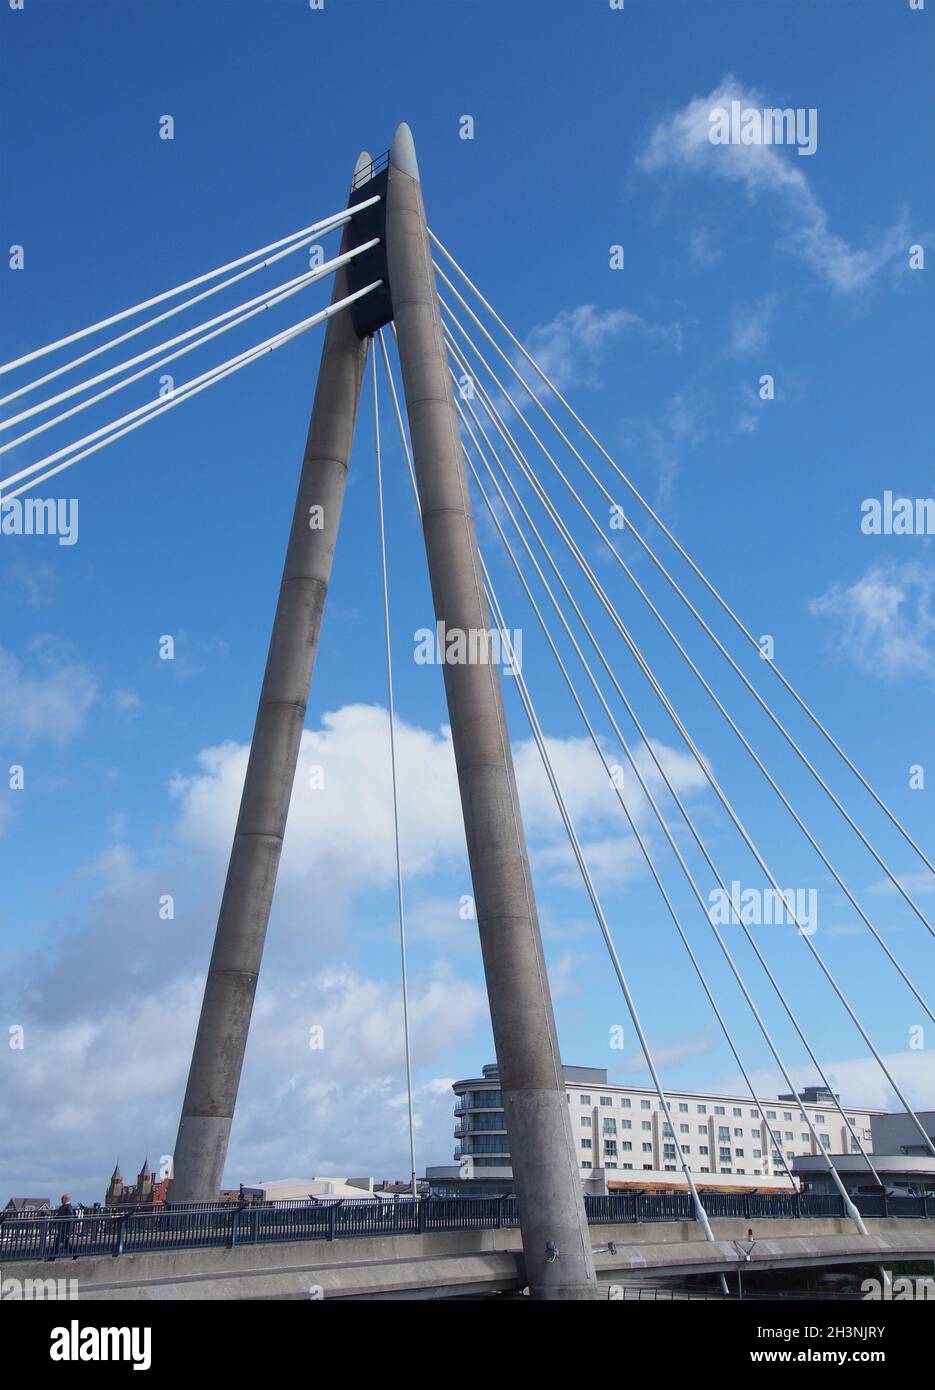 The concrete tower and cables of the suspension bridge in southport merseyside against a blue sky Stock Photo